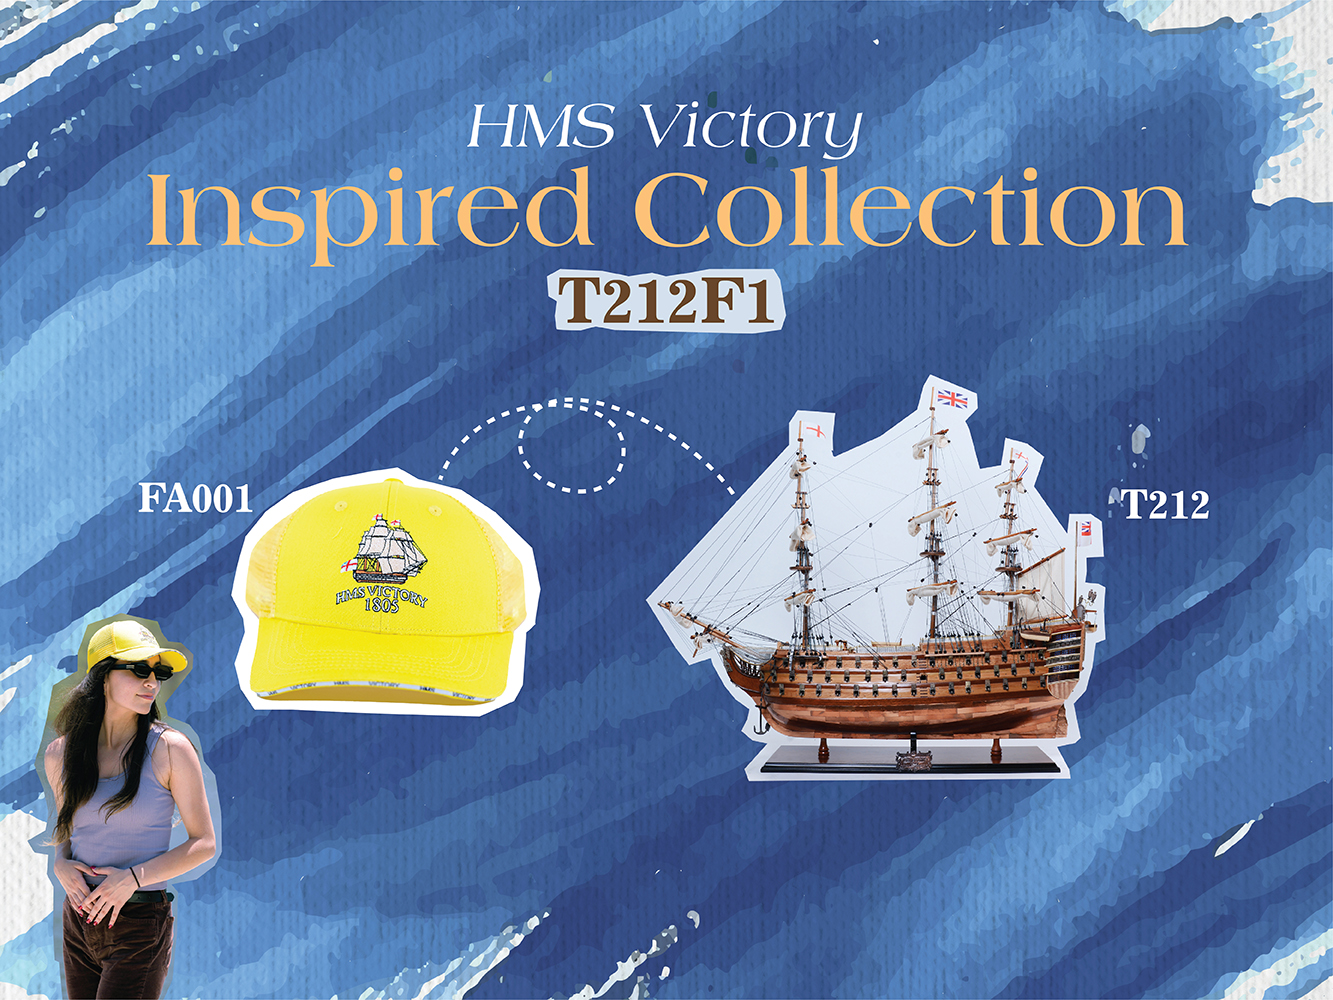 T212F1 Ultimate HMS Victory Combo: A Model Ship and Classic Hat t212f1-ultimate-hms-victory-combo-a-model-ship-and-classic-hat-l01.jpg